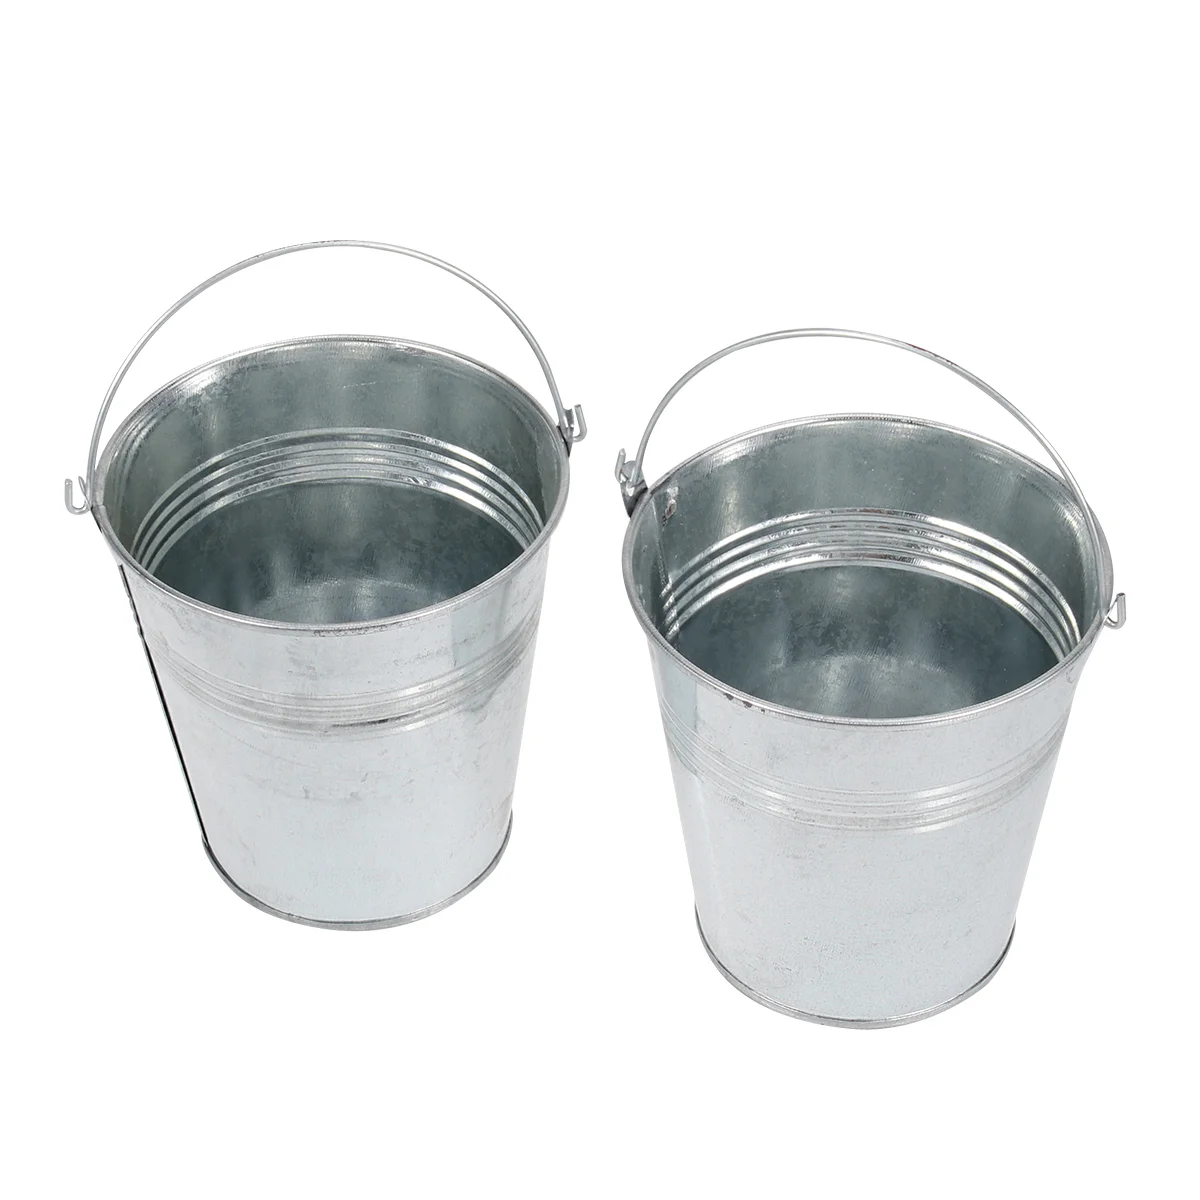 

Bucket Metal Buckets Mini Tin Tinplate Pails French Fries Pail Ice Serving Party Galvanized Flower Candy Food Crafts Champagne